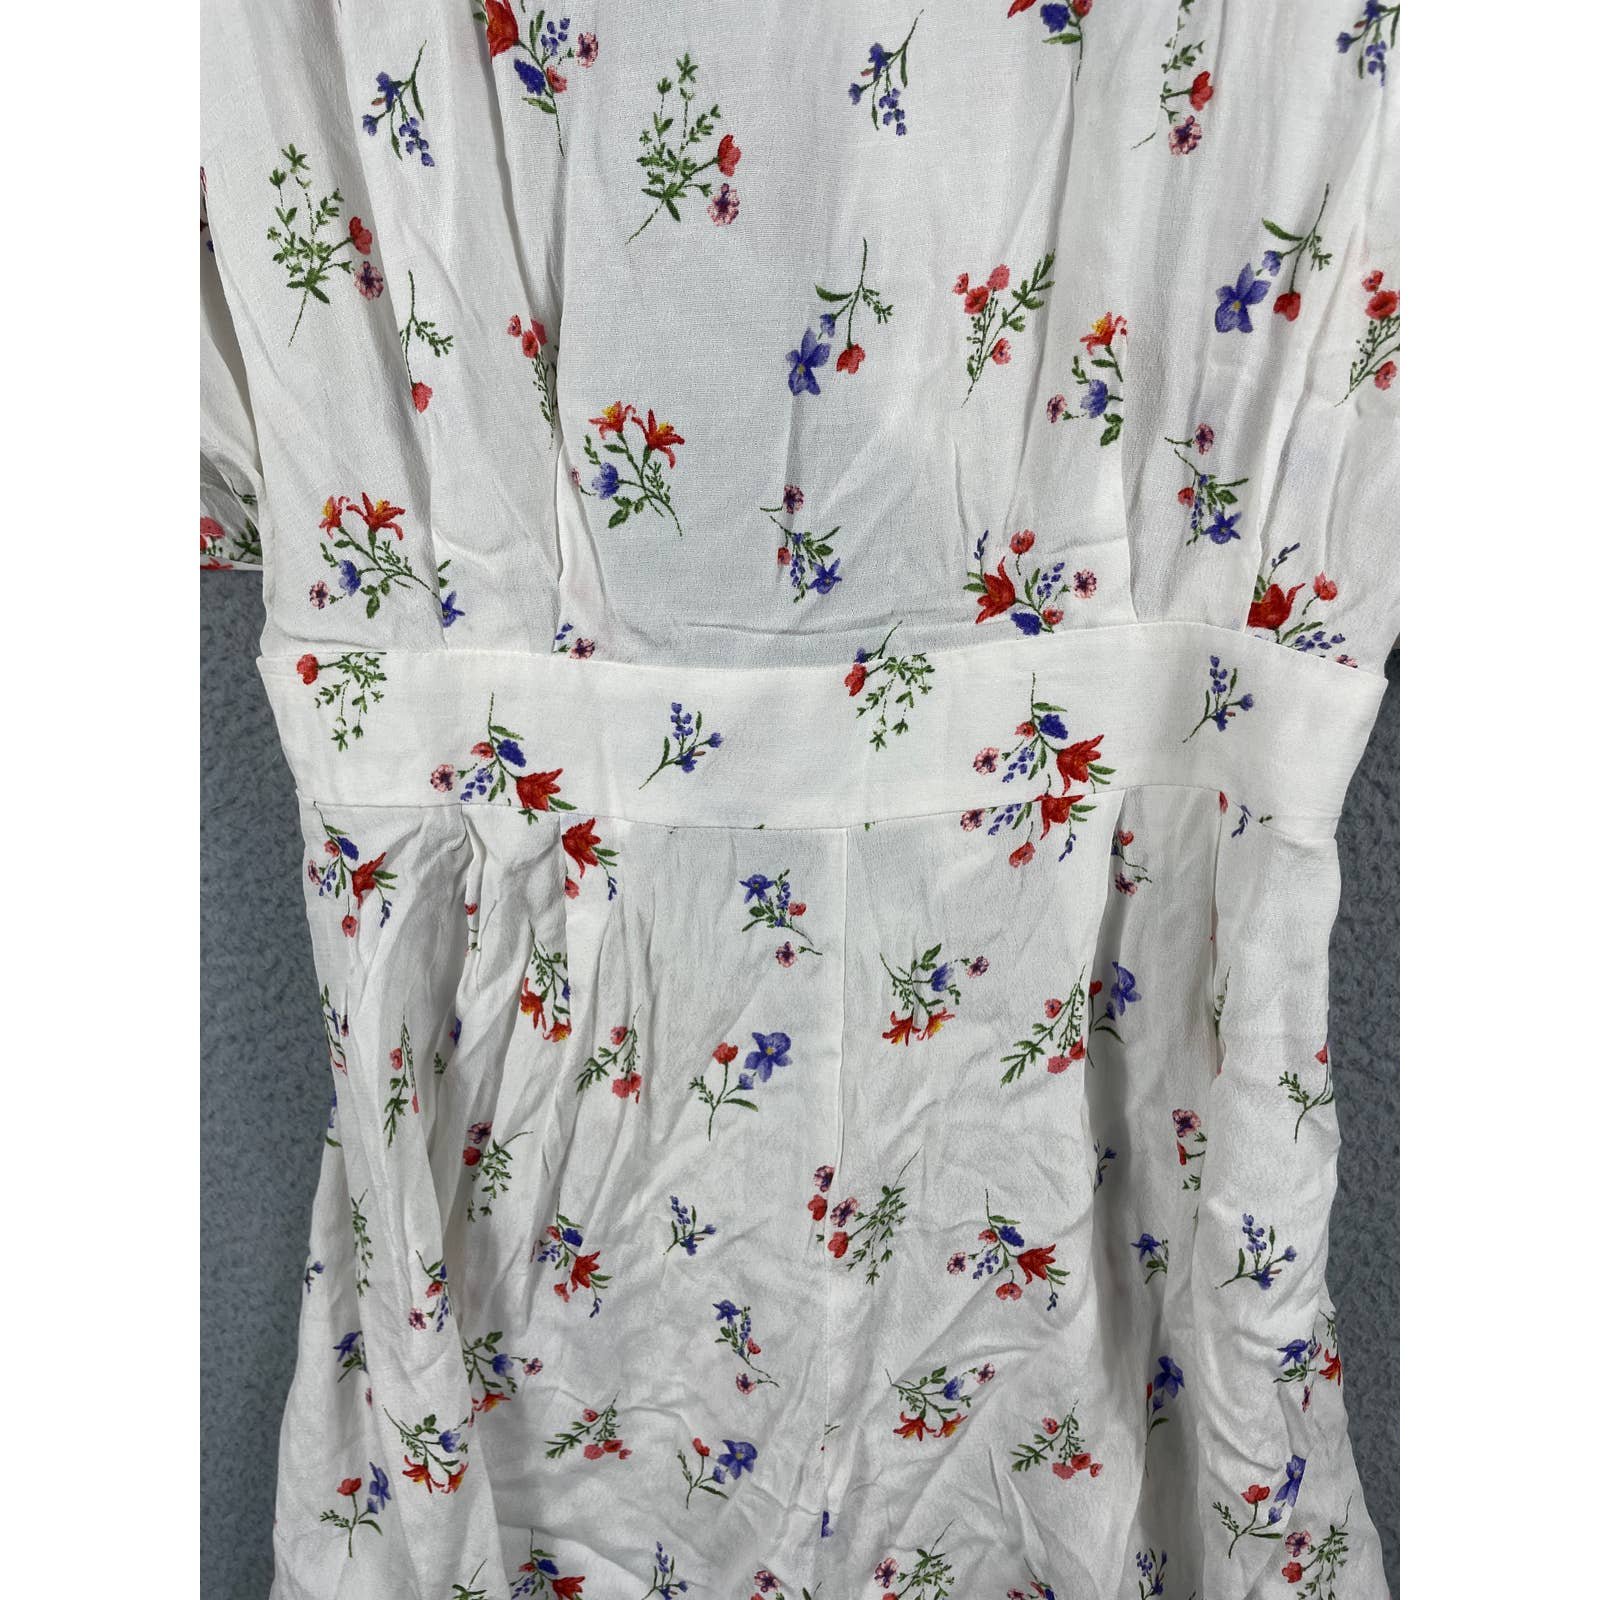 save up to 70% Forever 21 Women´s Romper White with Floral Print Size L IHkhE22eA on sale